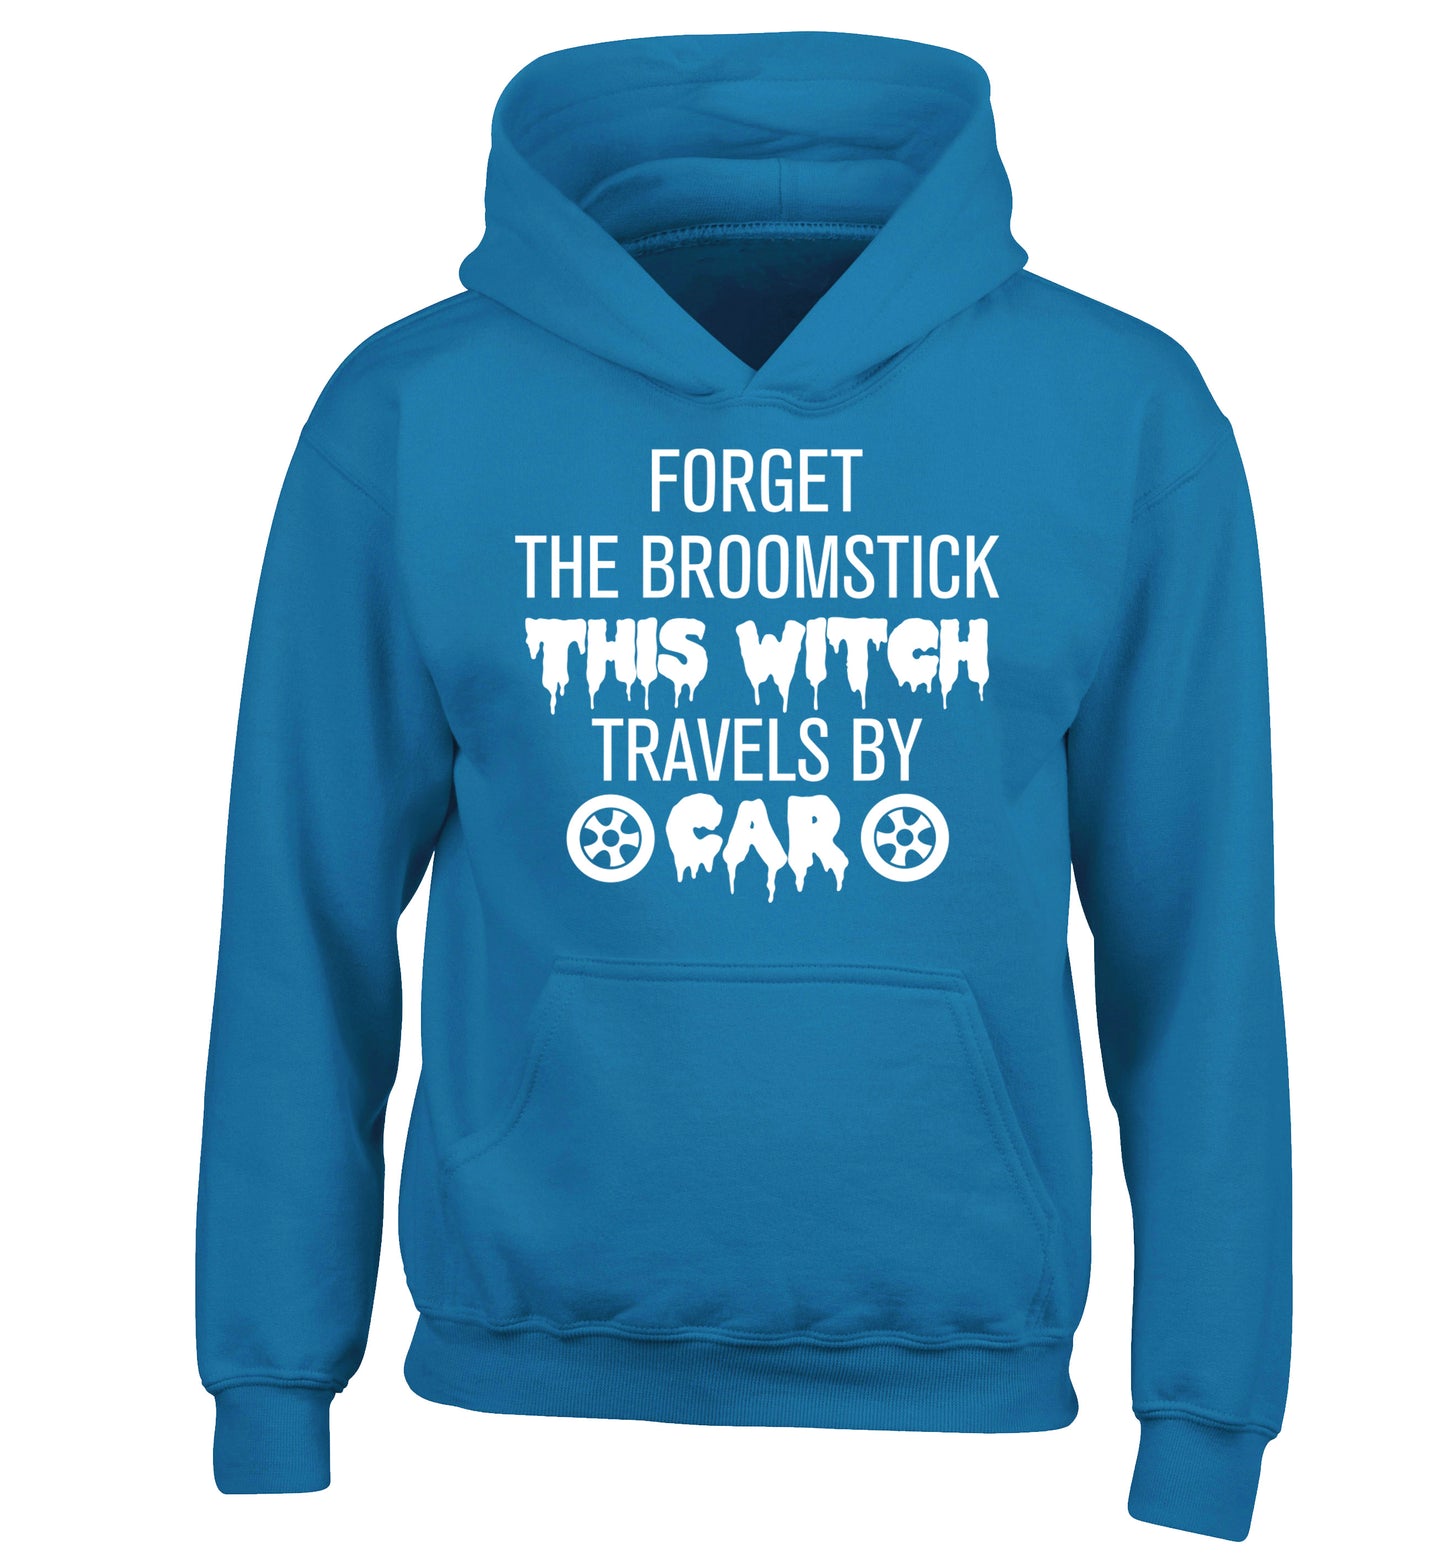 Forget the broomstick this witch travels by car children's blue hoodie 12-14 Years